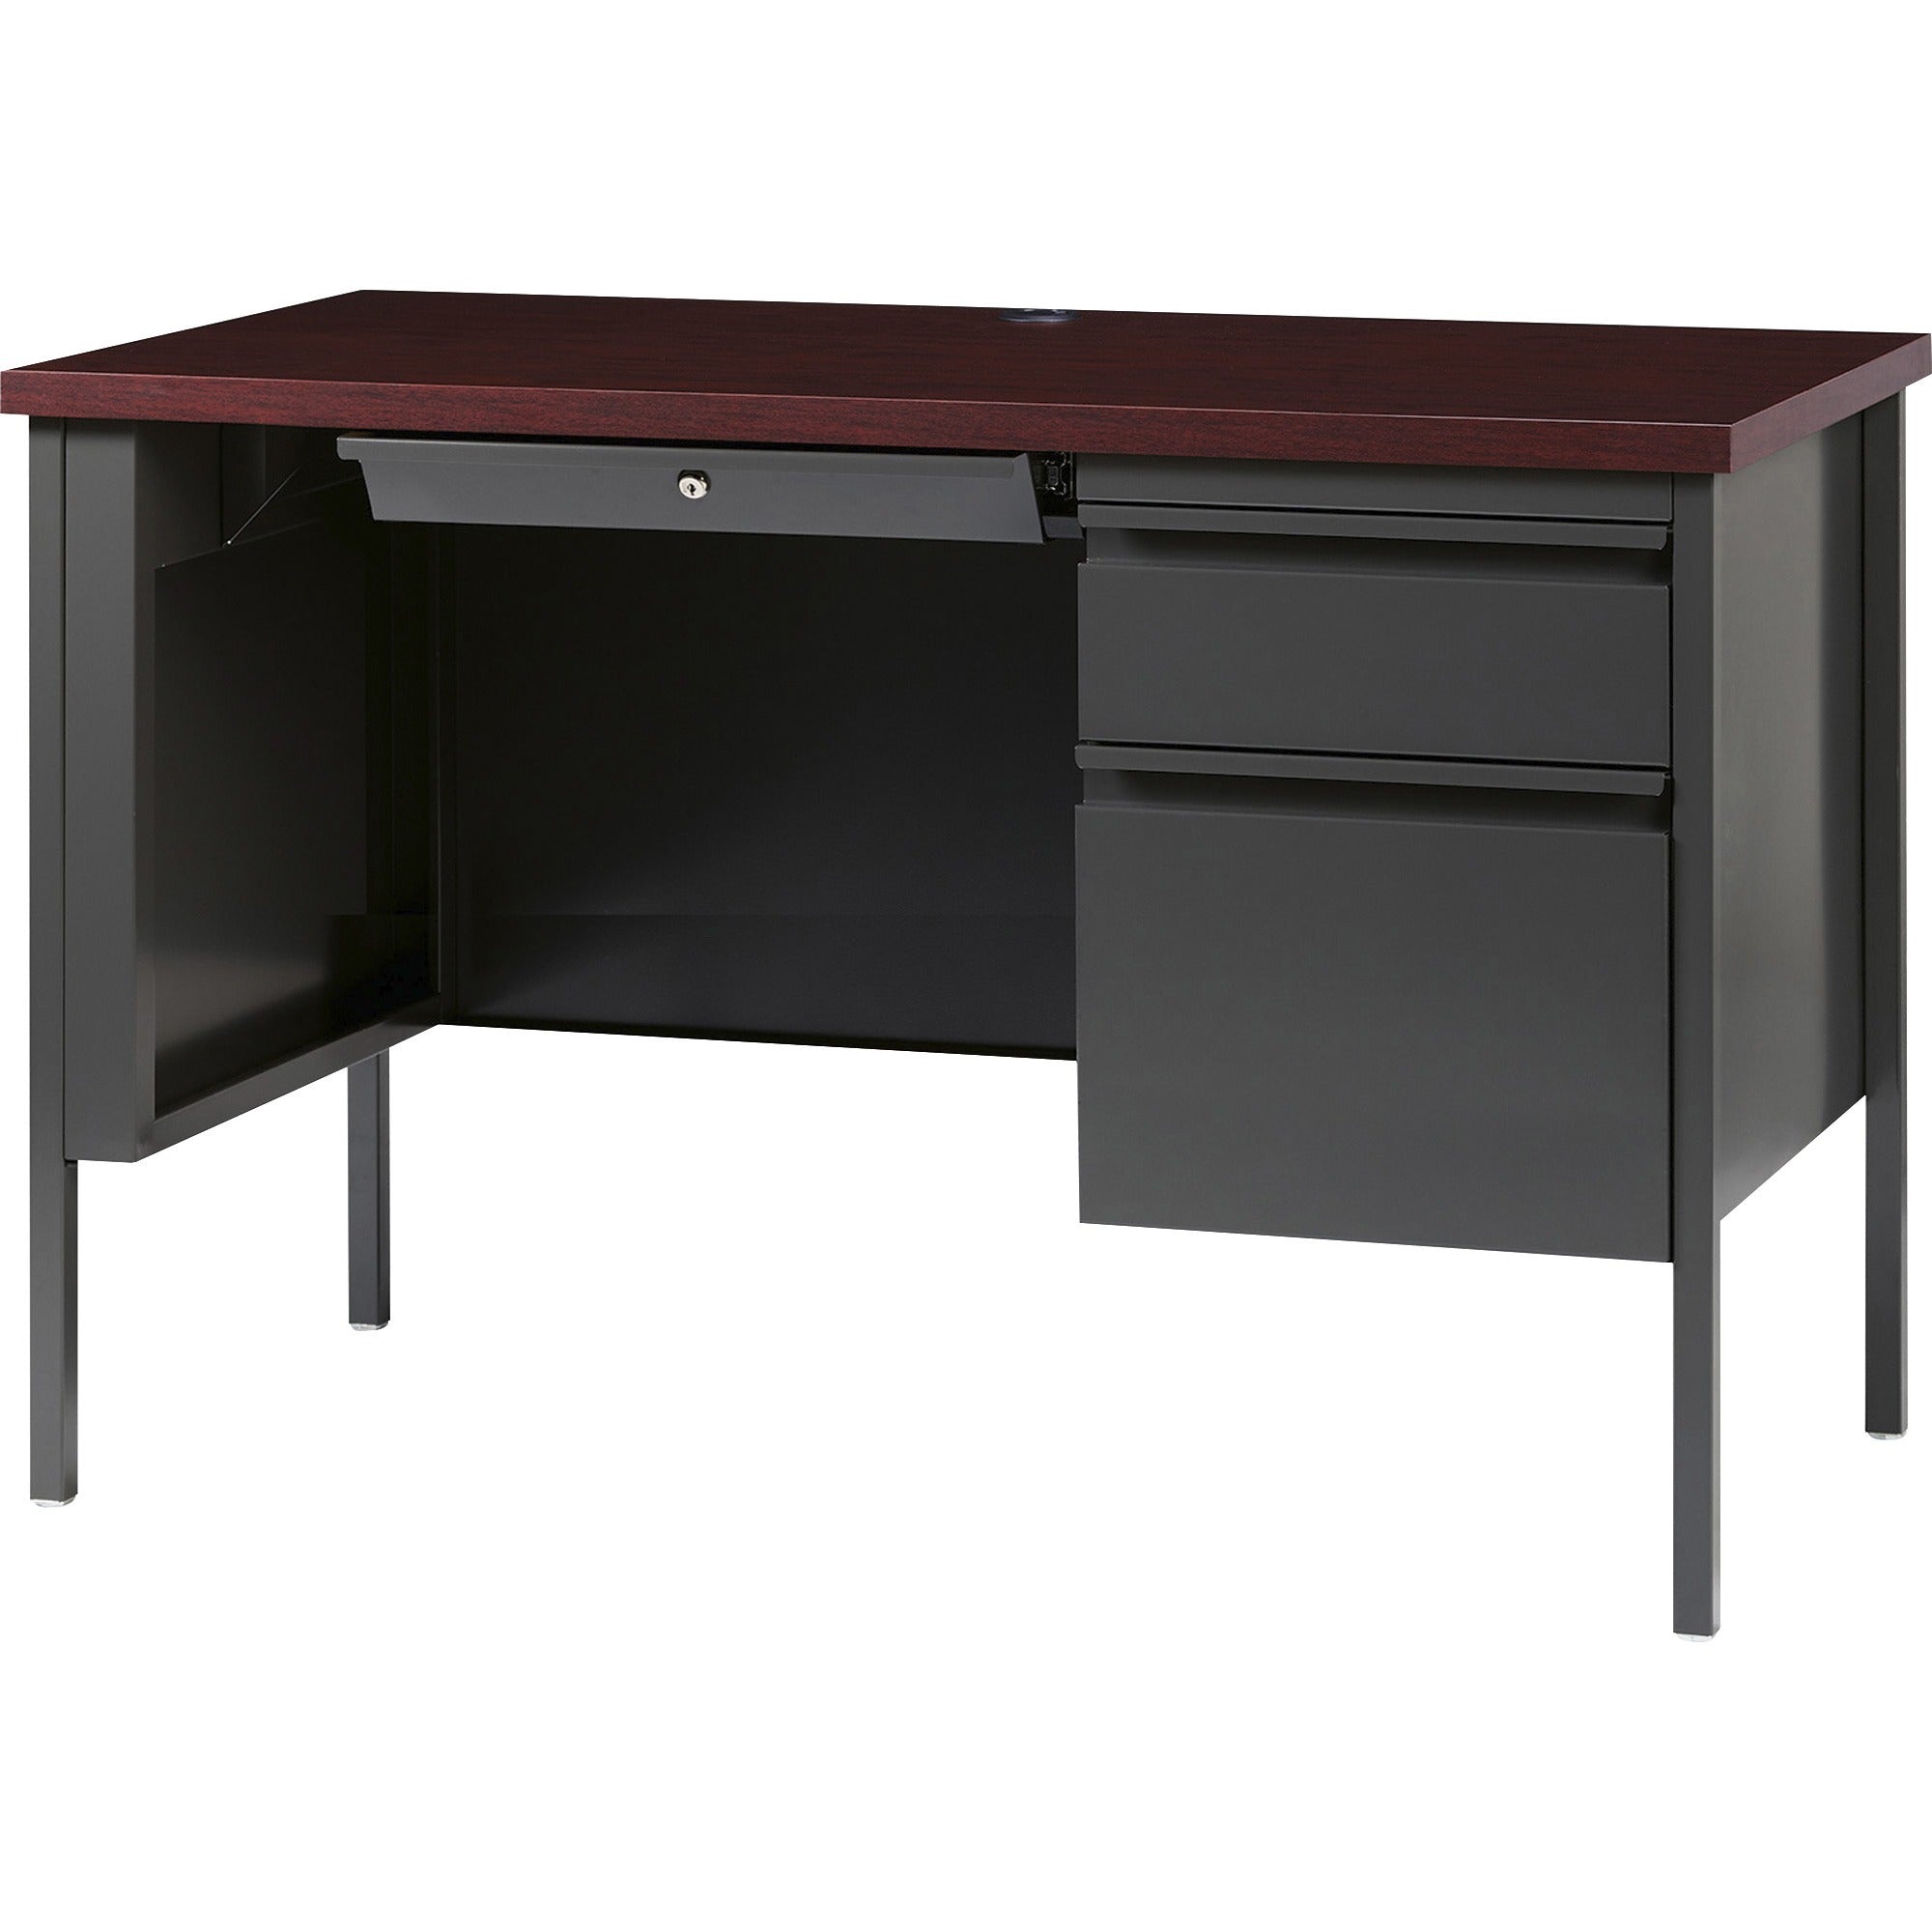 lorell-fortress-series-45-1-2-right-single-pedestal-desk-455-x-24295--11-top-box-file-drawers-single-pedestal-on-right-side-square-edge_llr66949 - 3